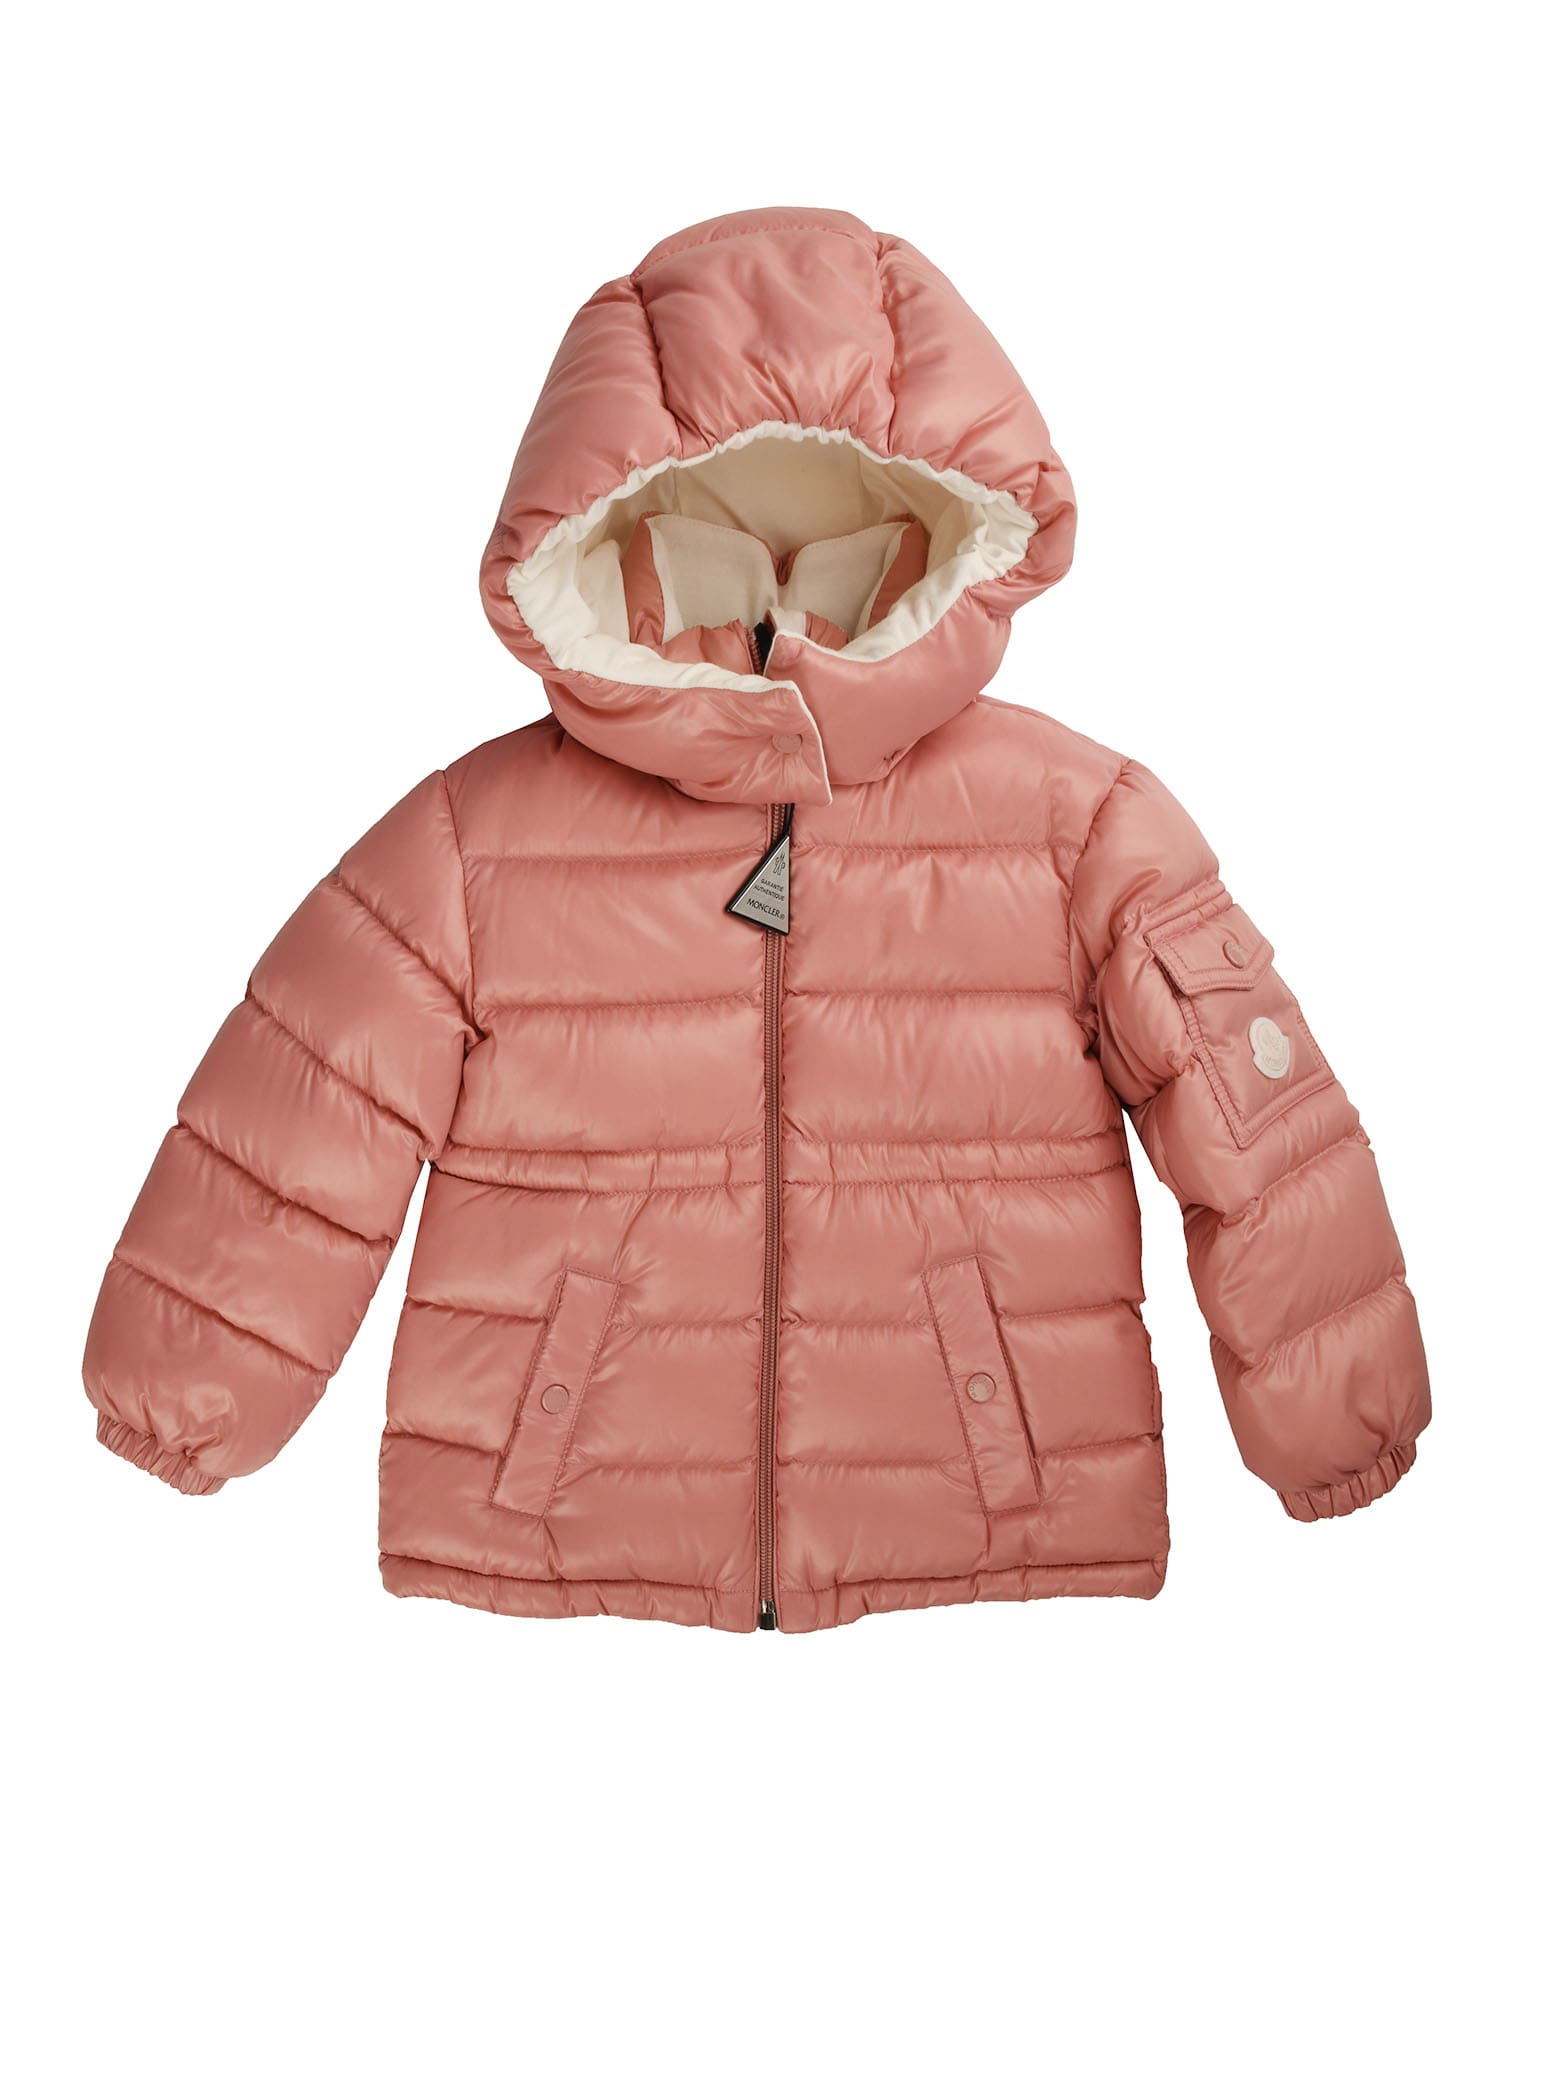 Moncler Pink Jacket With Hood